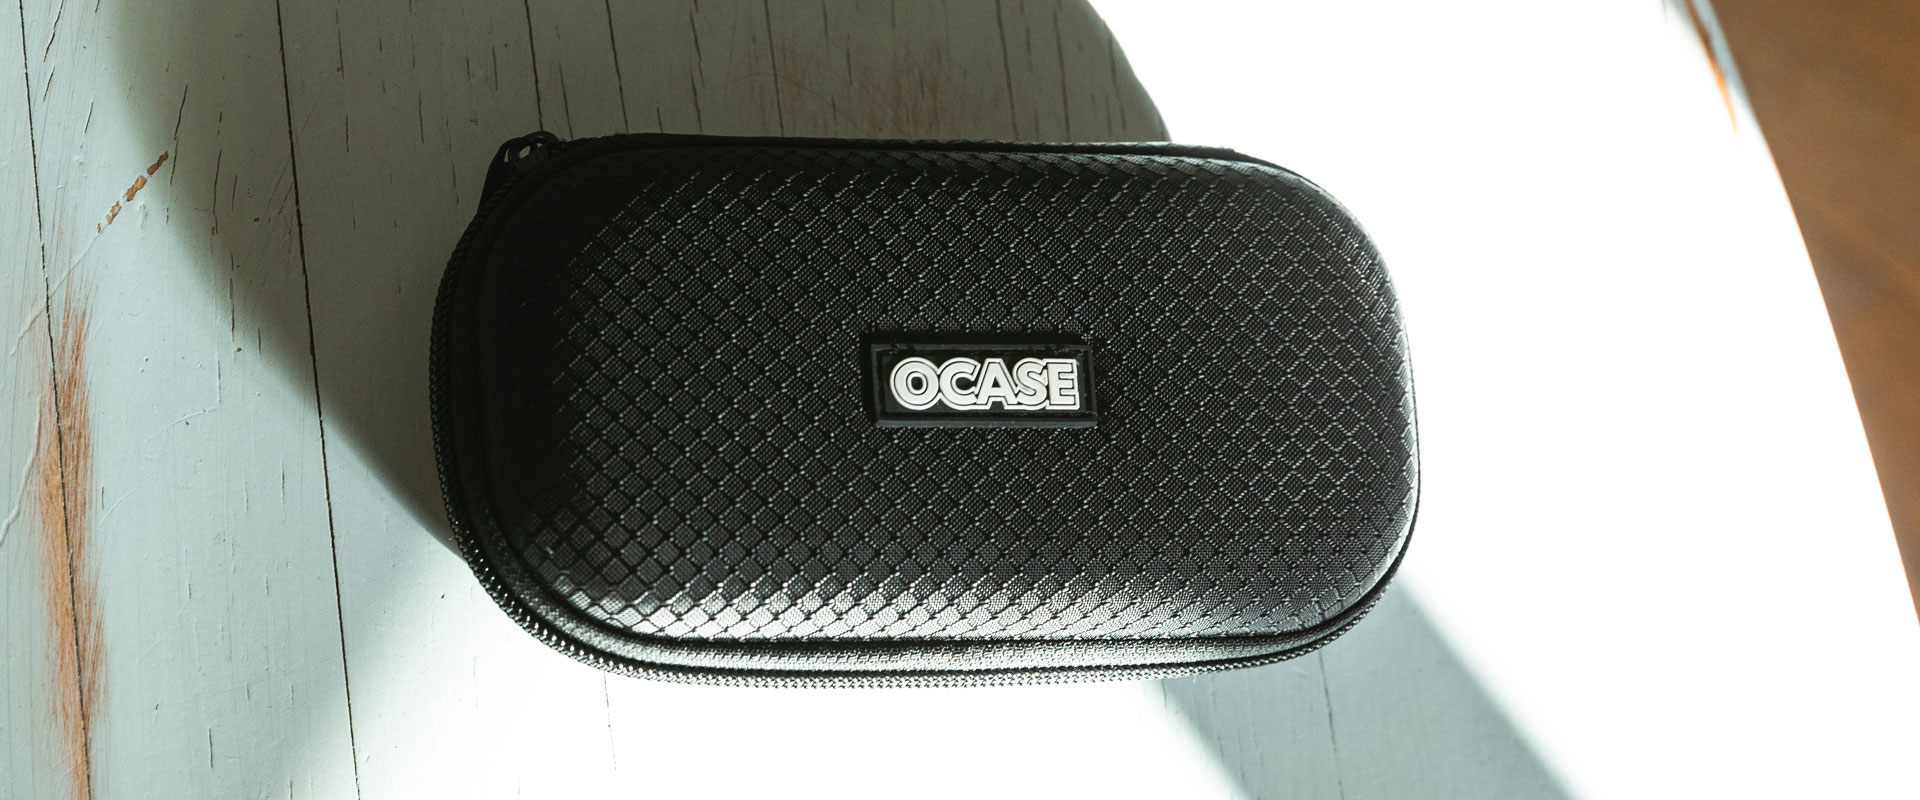 OCASE, Case For Daysy At Home